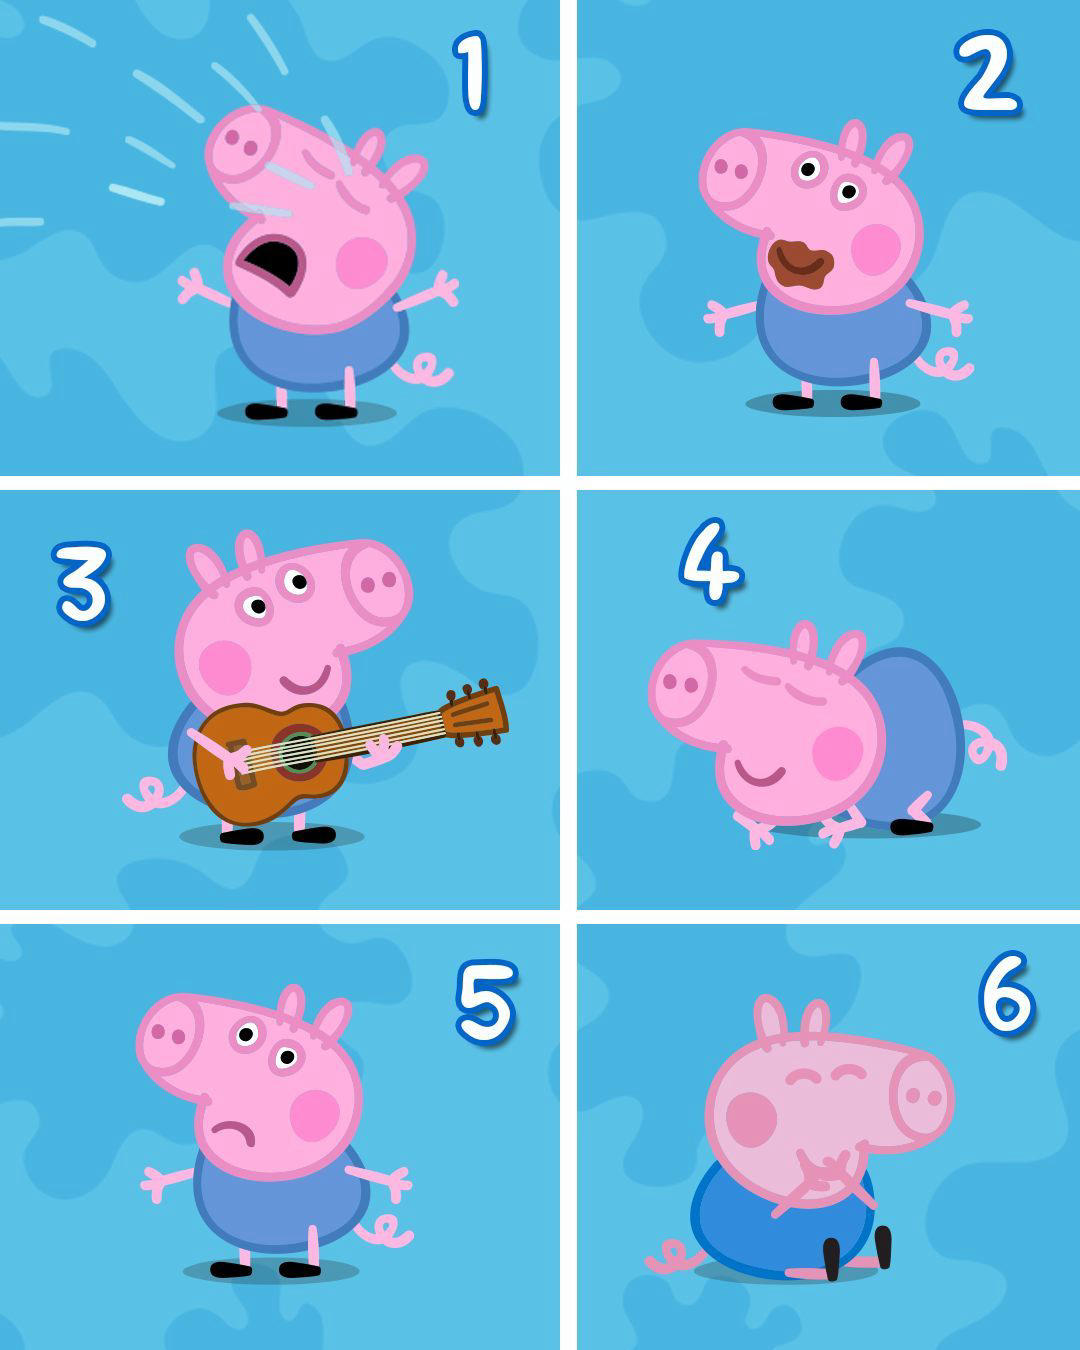 Peppa Pig - Which George is your current mood